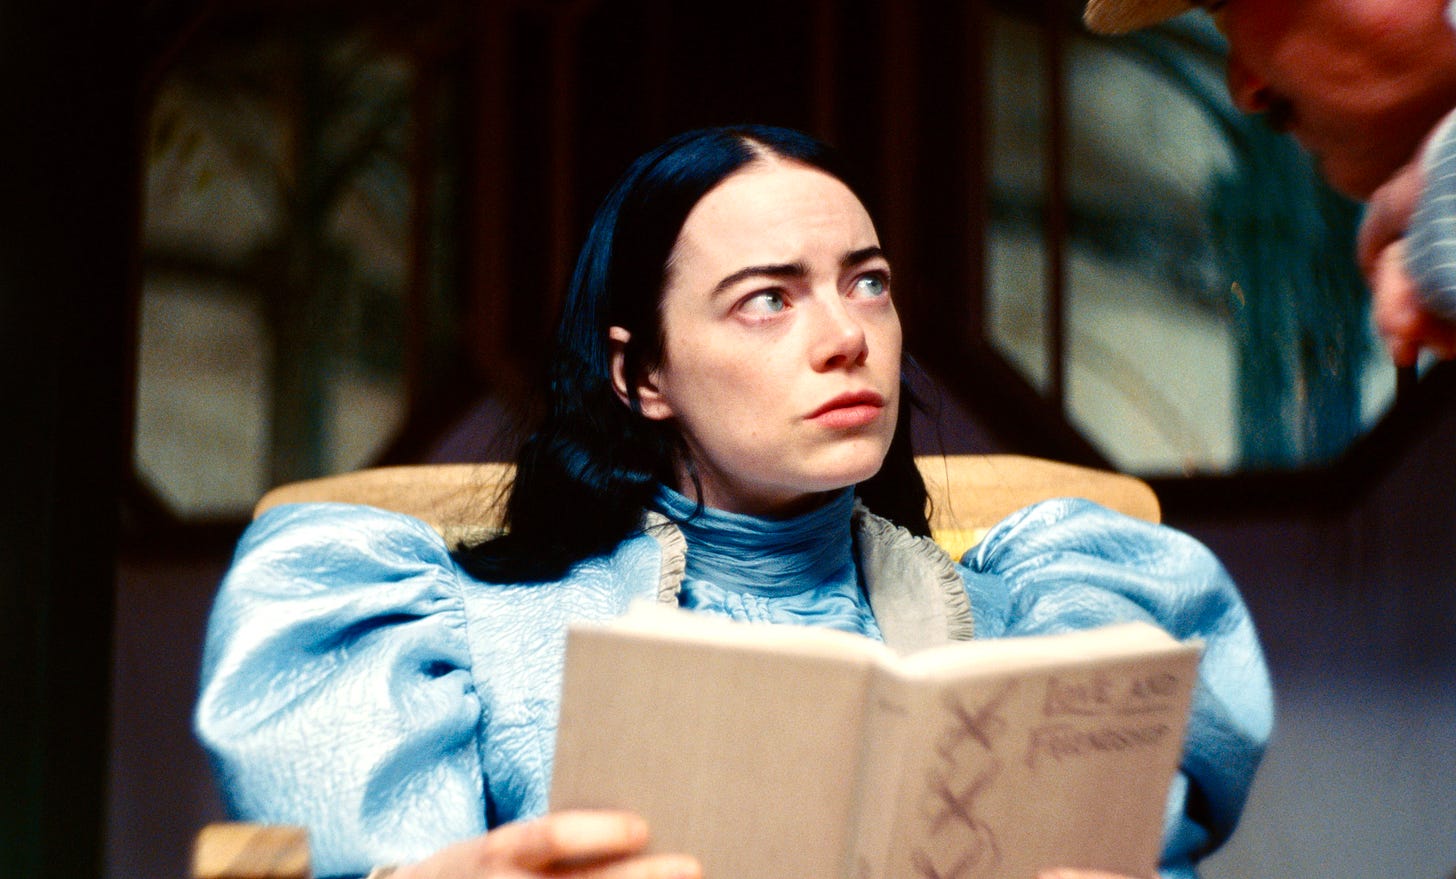 A woman in a blue dress with puffy sleeves looks up from the book she is reading